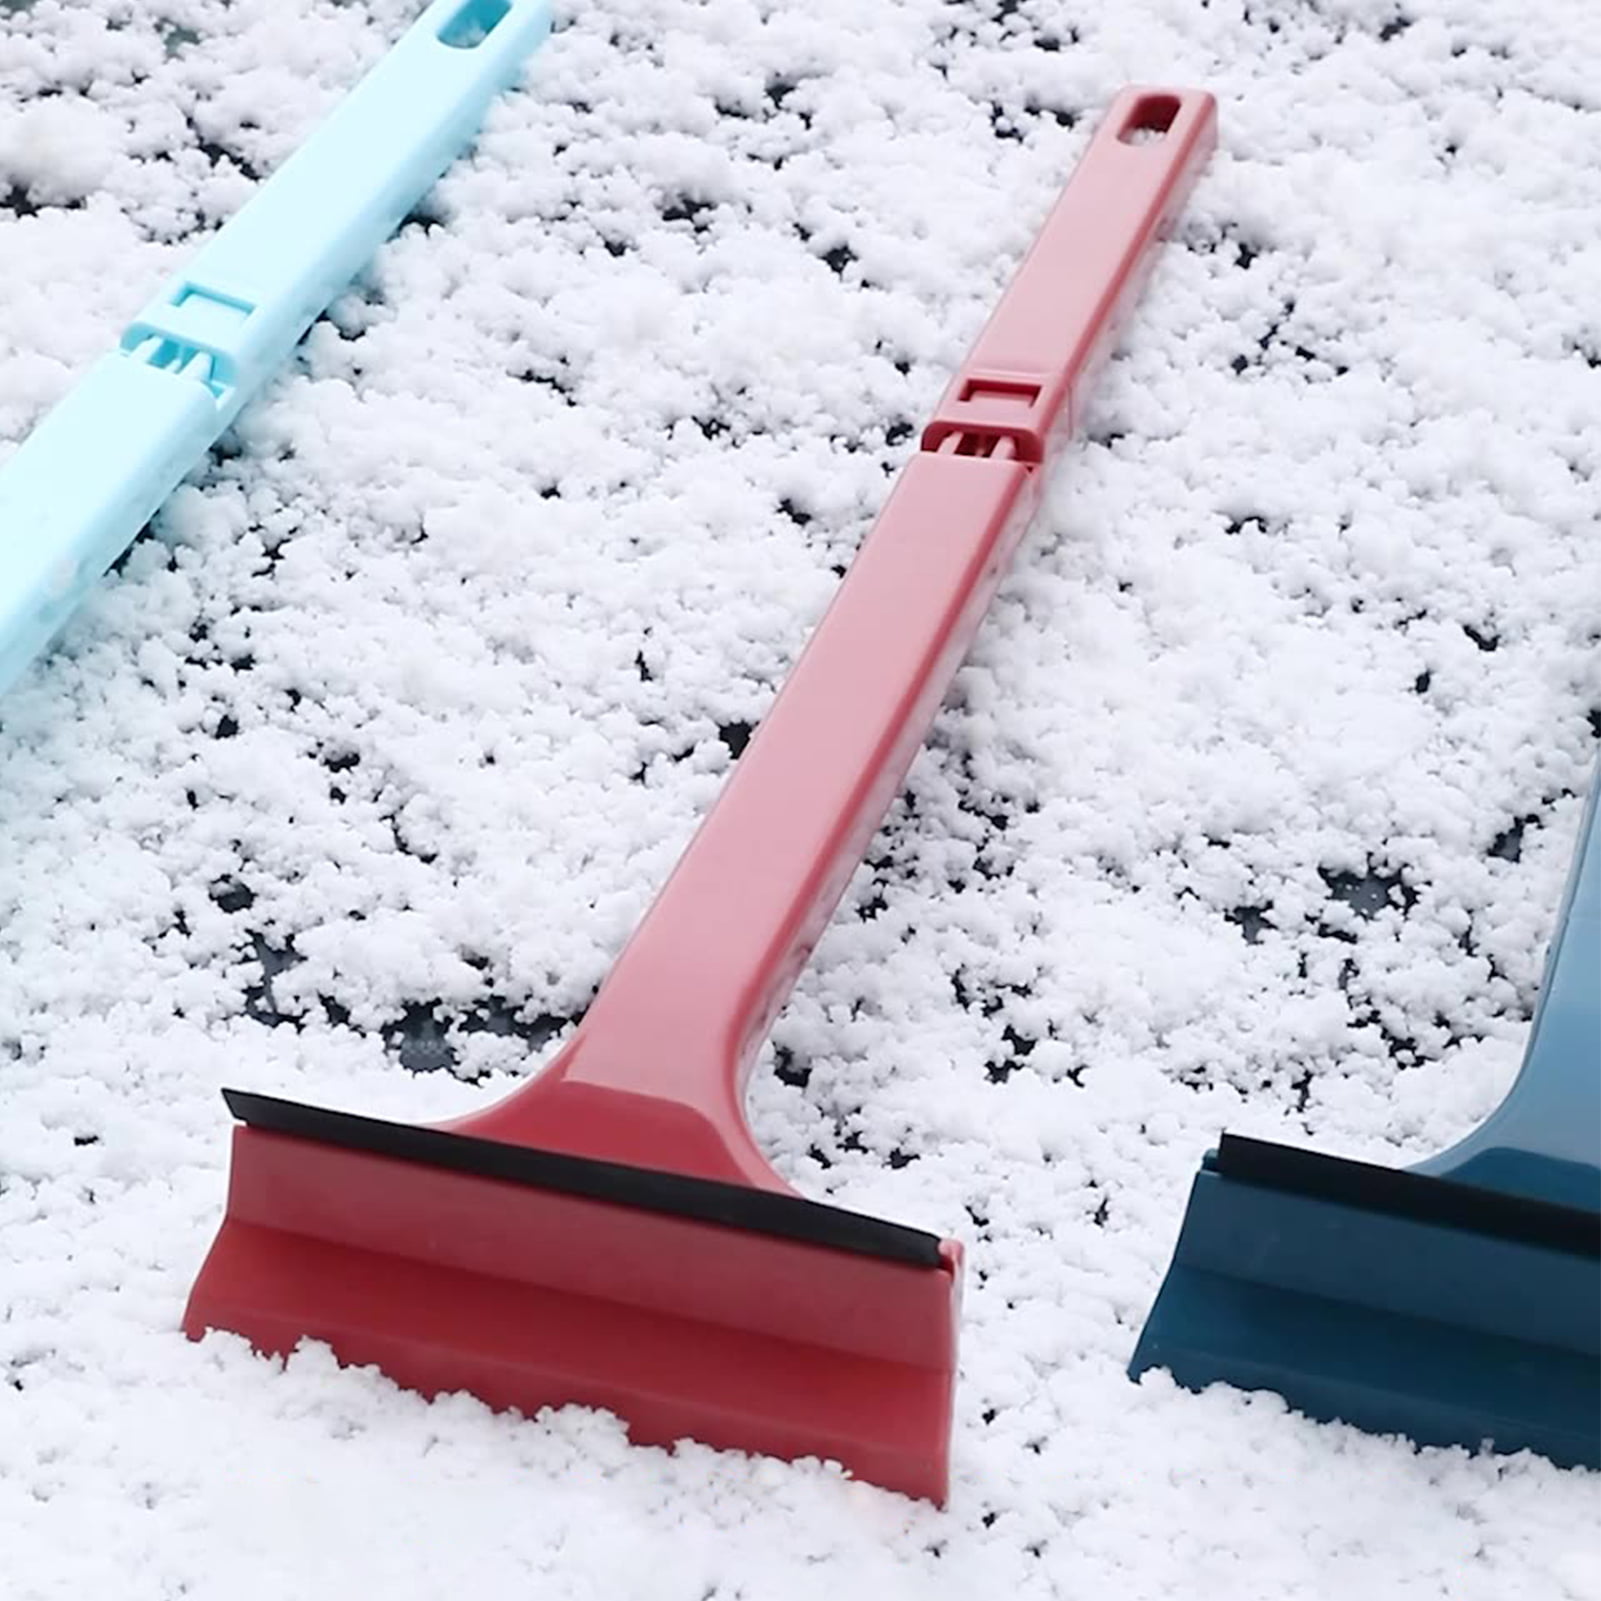 Ice Scrapers For Car Windshield, Beef Tendon Shovel Surface Snow